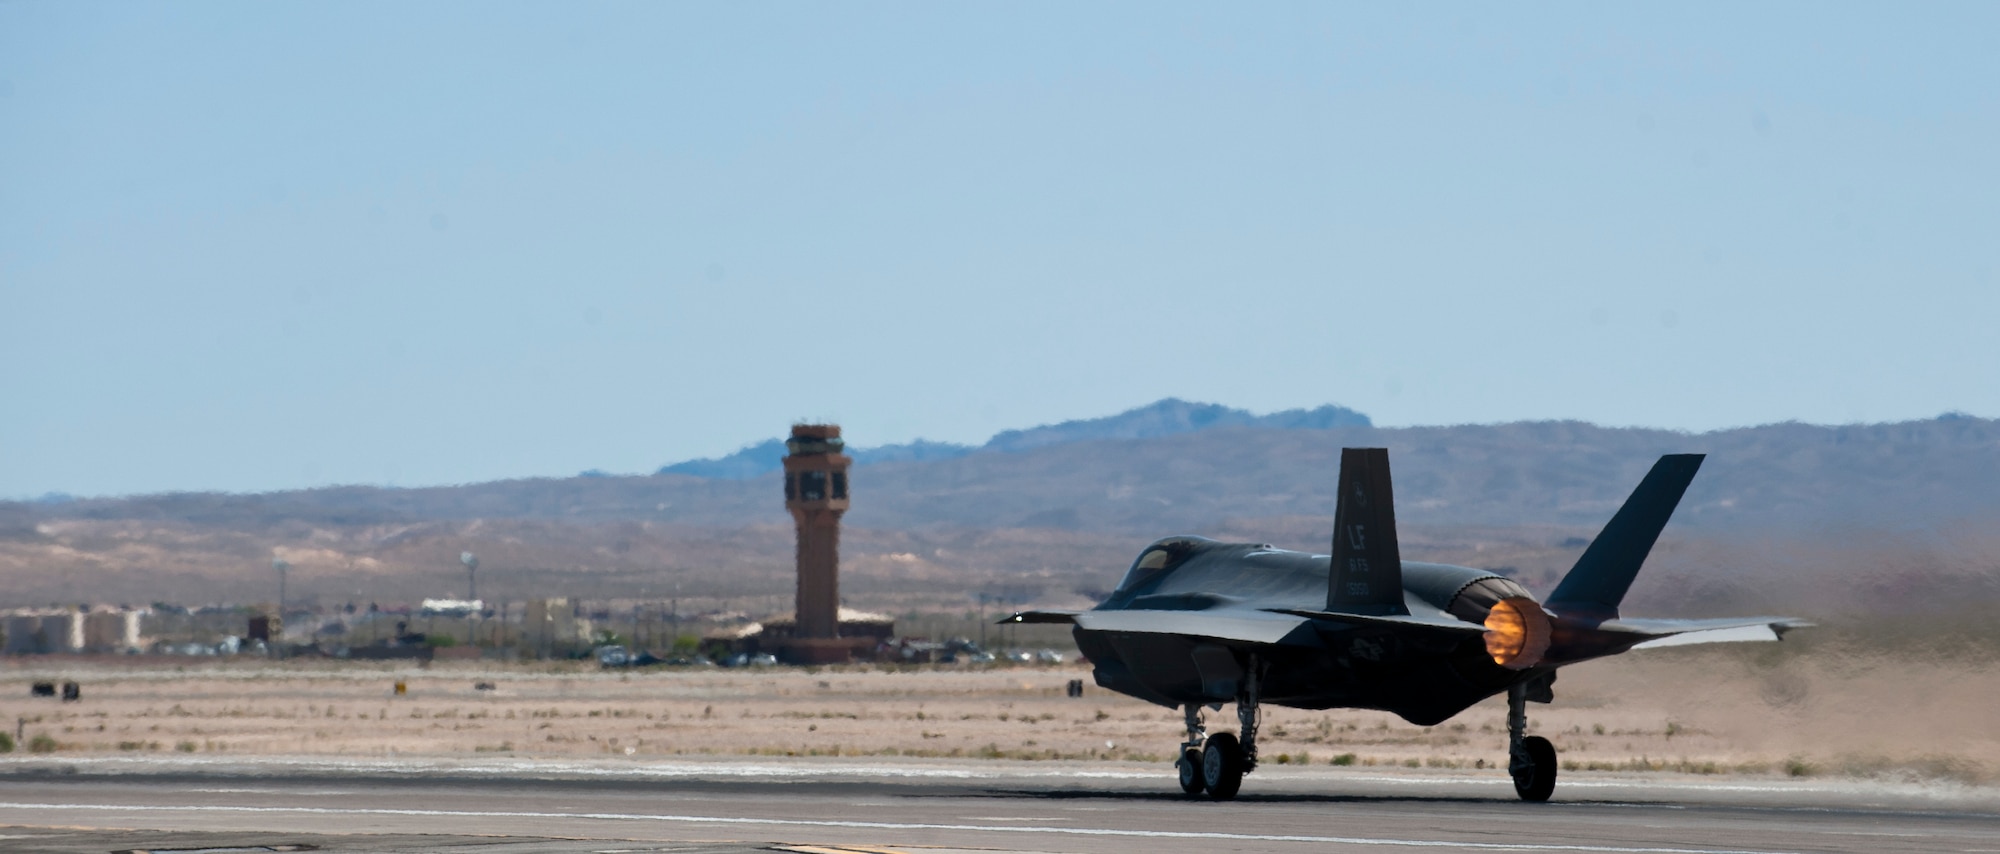 A 61st Fighter Squadron F-35 Lightning II from Luke Air Force Base, Arizona, takes off from the Nellis AFB, Nevada, flightline, April 15, 2015. (U.S. Air Force photo by Senior Airman Thomas Spangler)